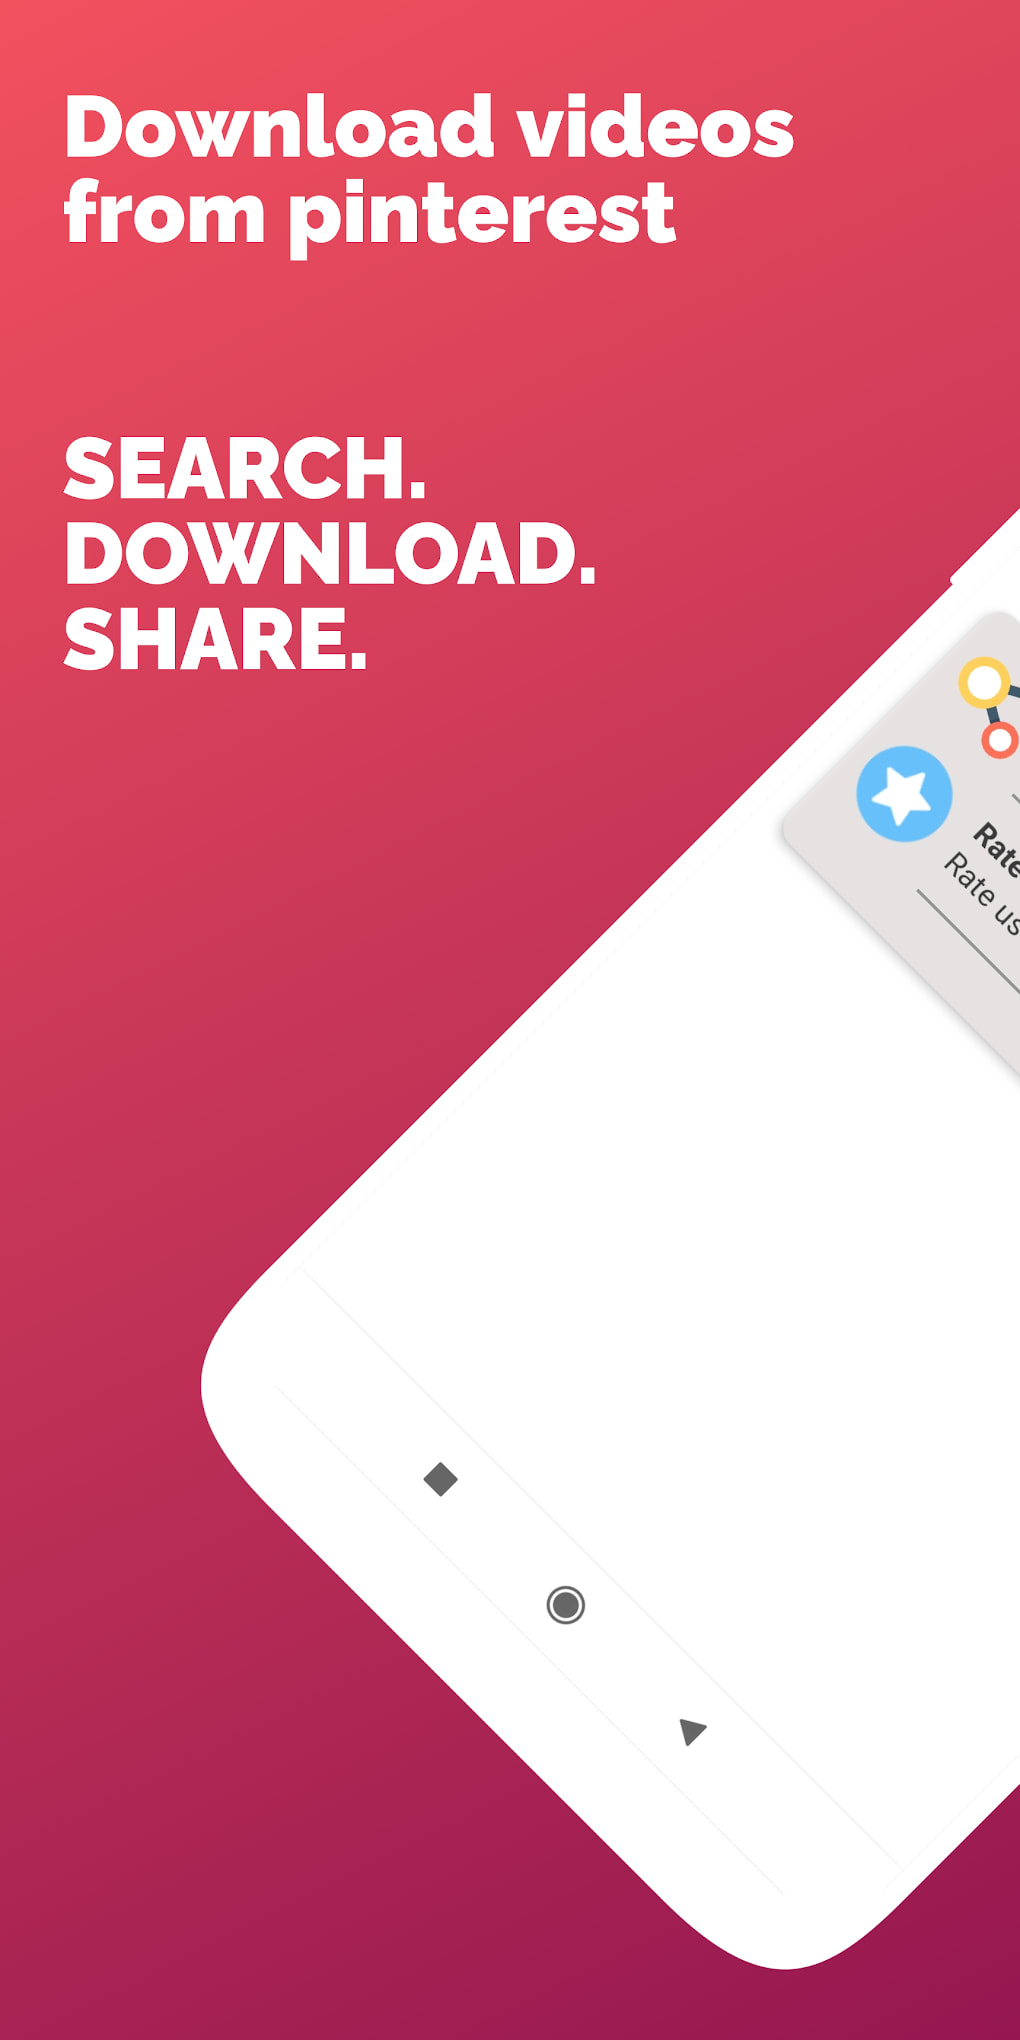 Video Downloader for Pinterest for Android - Free App Download